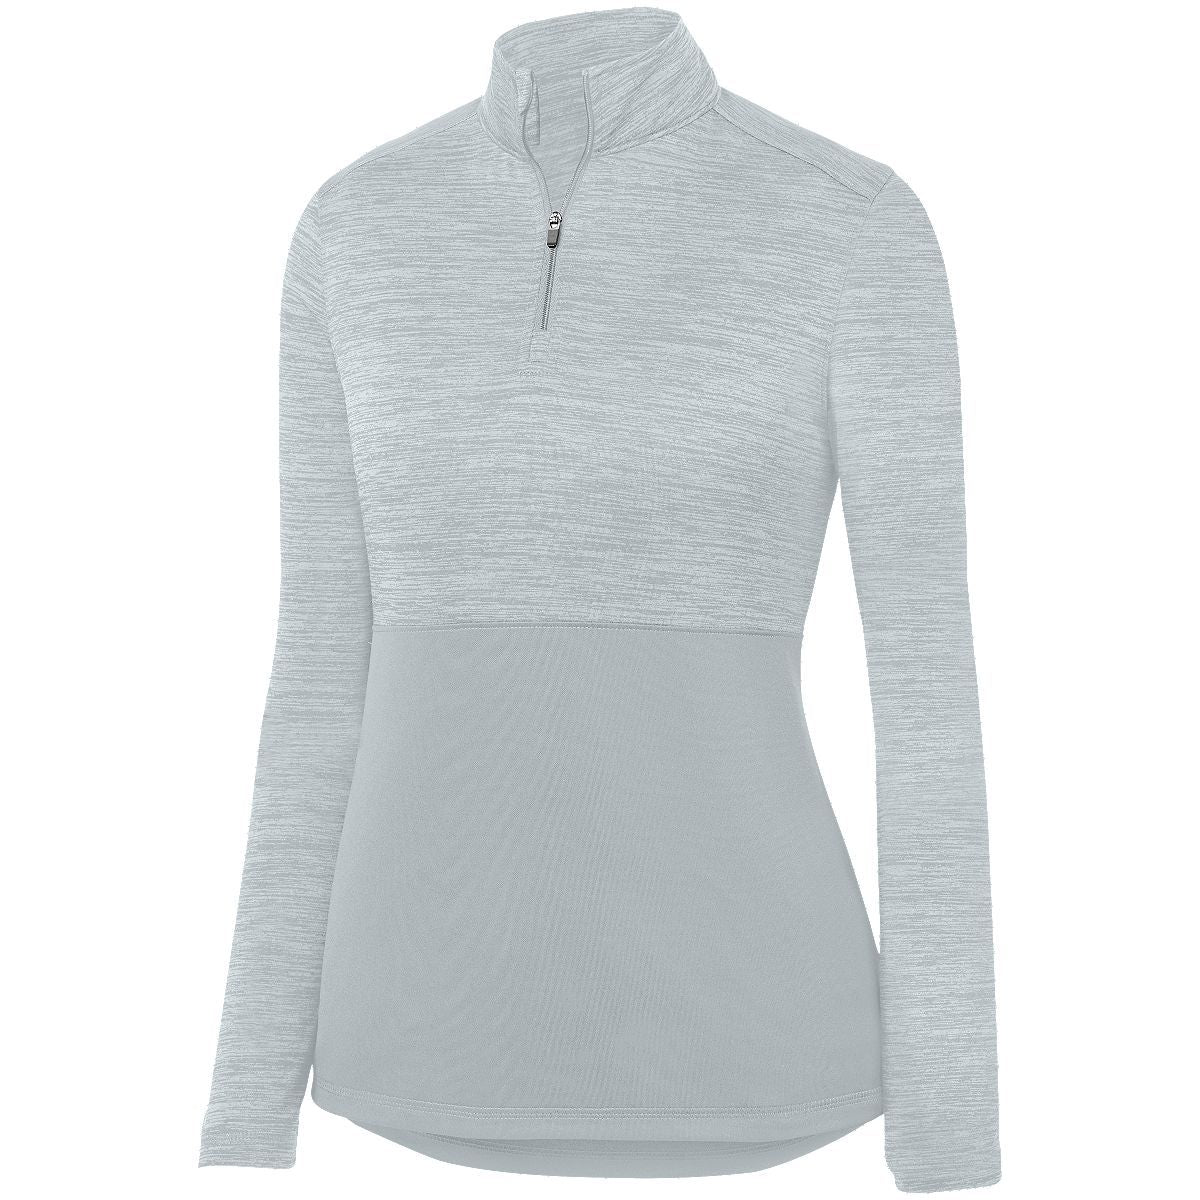 Augusta Sportswear Ladies Shadow Tonal Heather 1/4 Zip Pullover in Silver  -Part of the Ladies, Ladies-Pullover, Augusta-Products, Outerwear, Tonal-Fleece-Collection product lines at KanaleyCreations.com